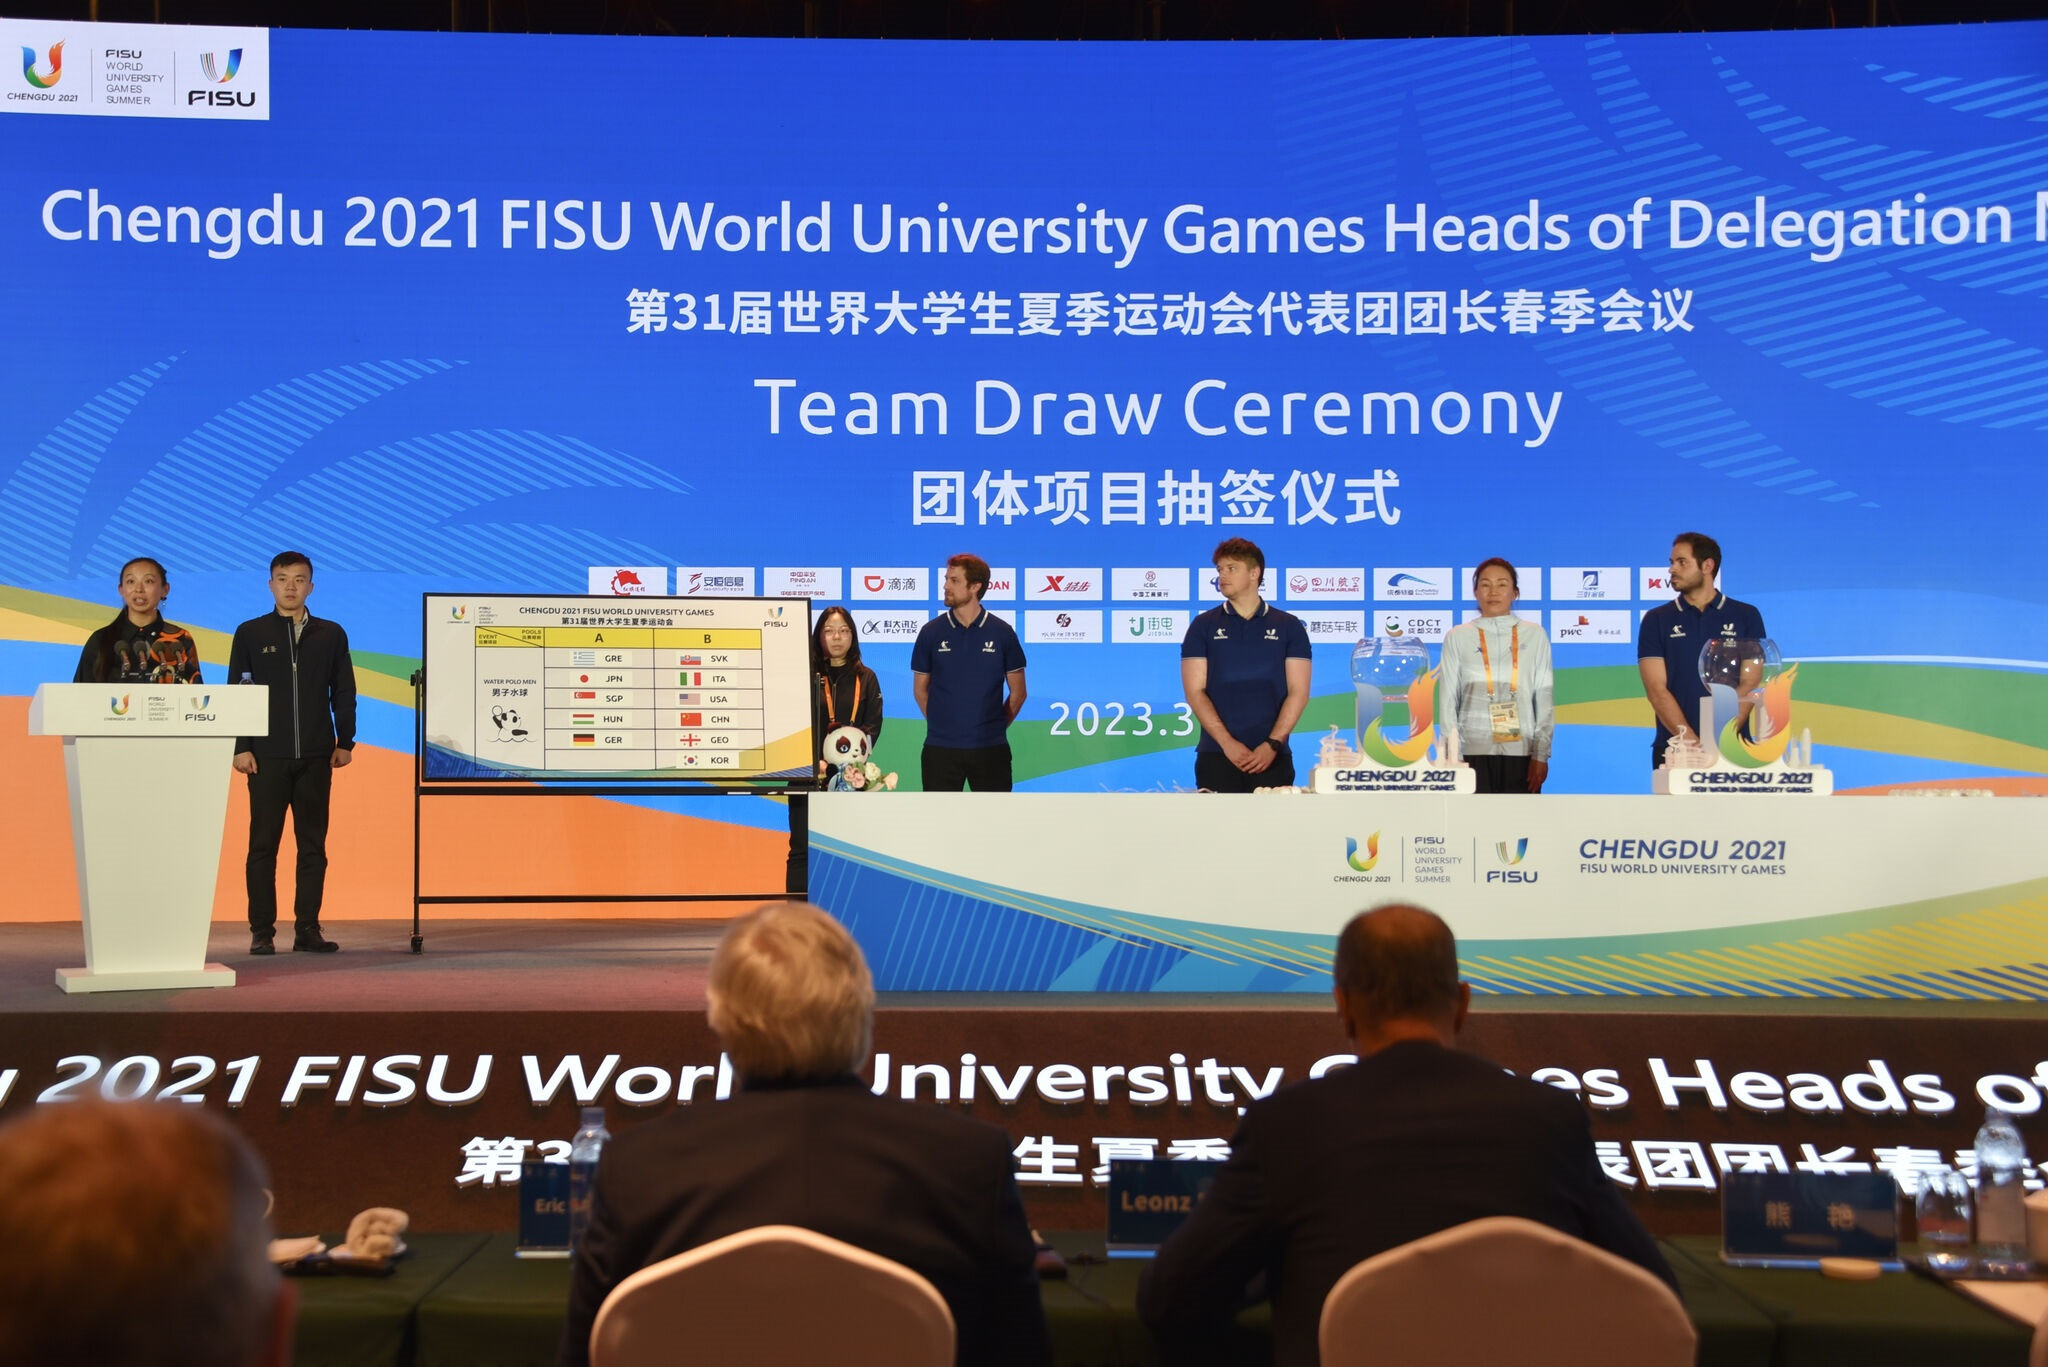 The draws were made for the team sports at Chengdu 2021 ©FISU